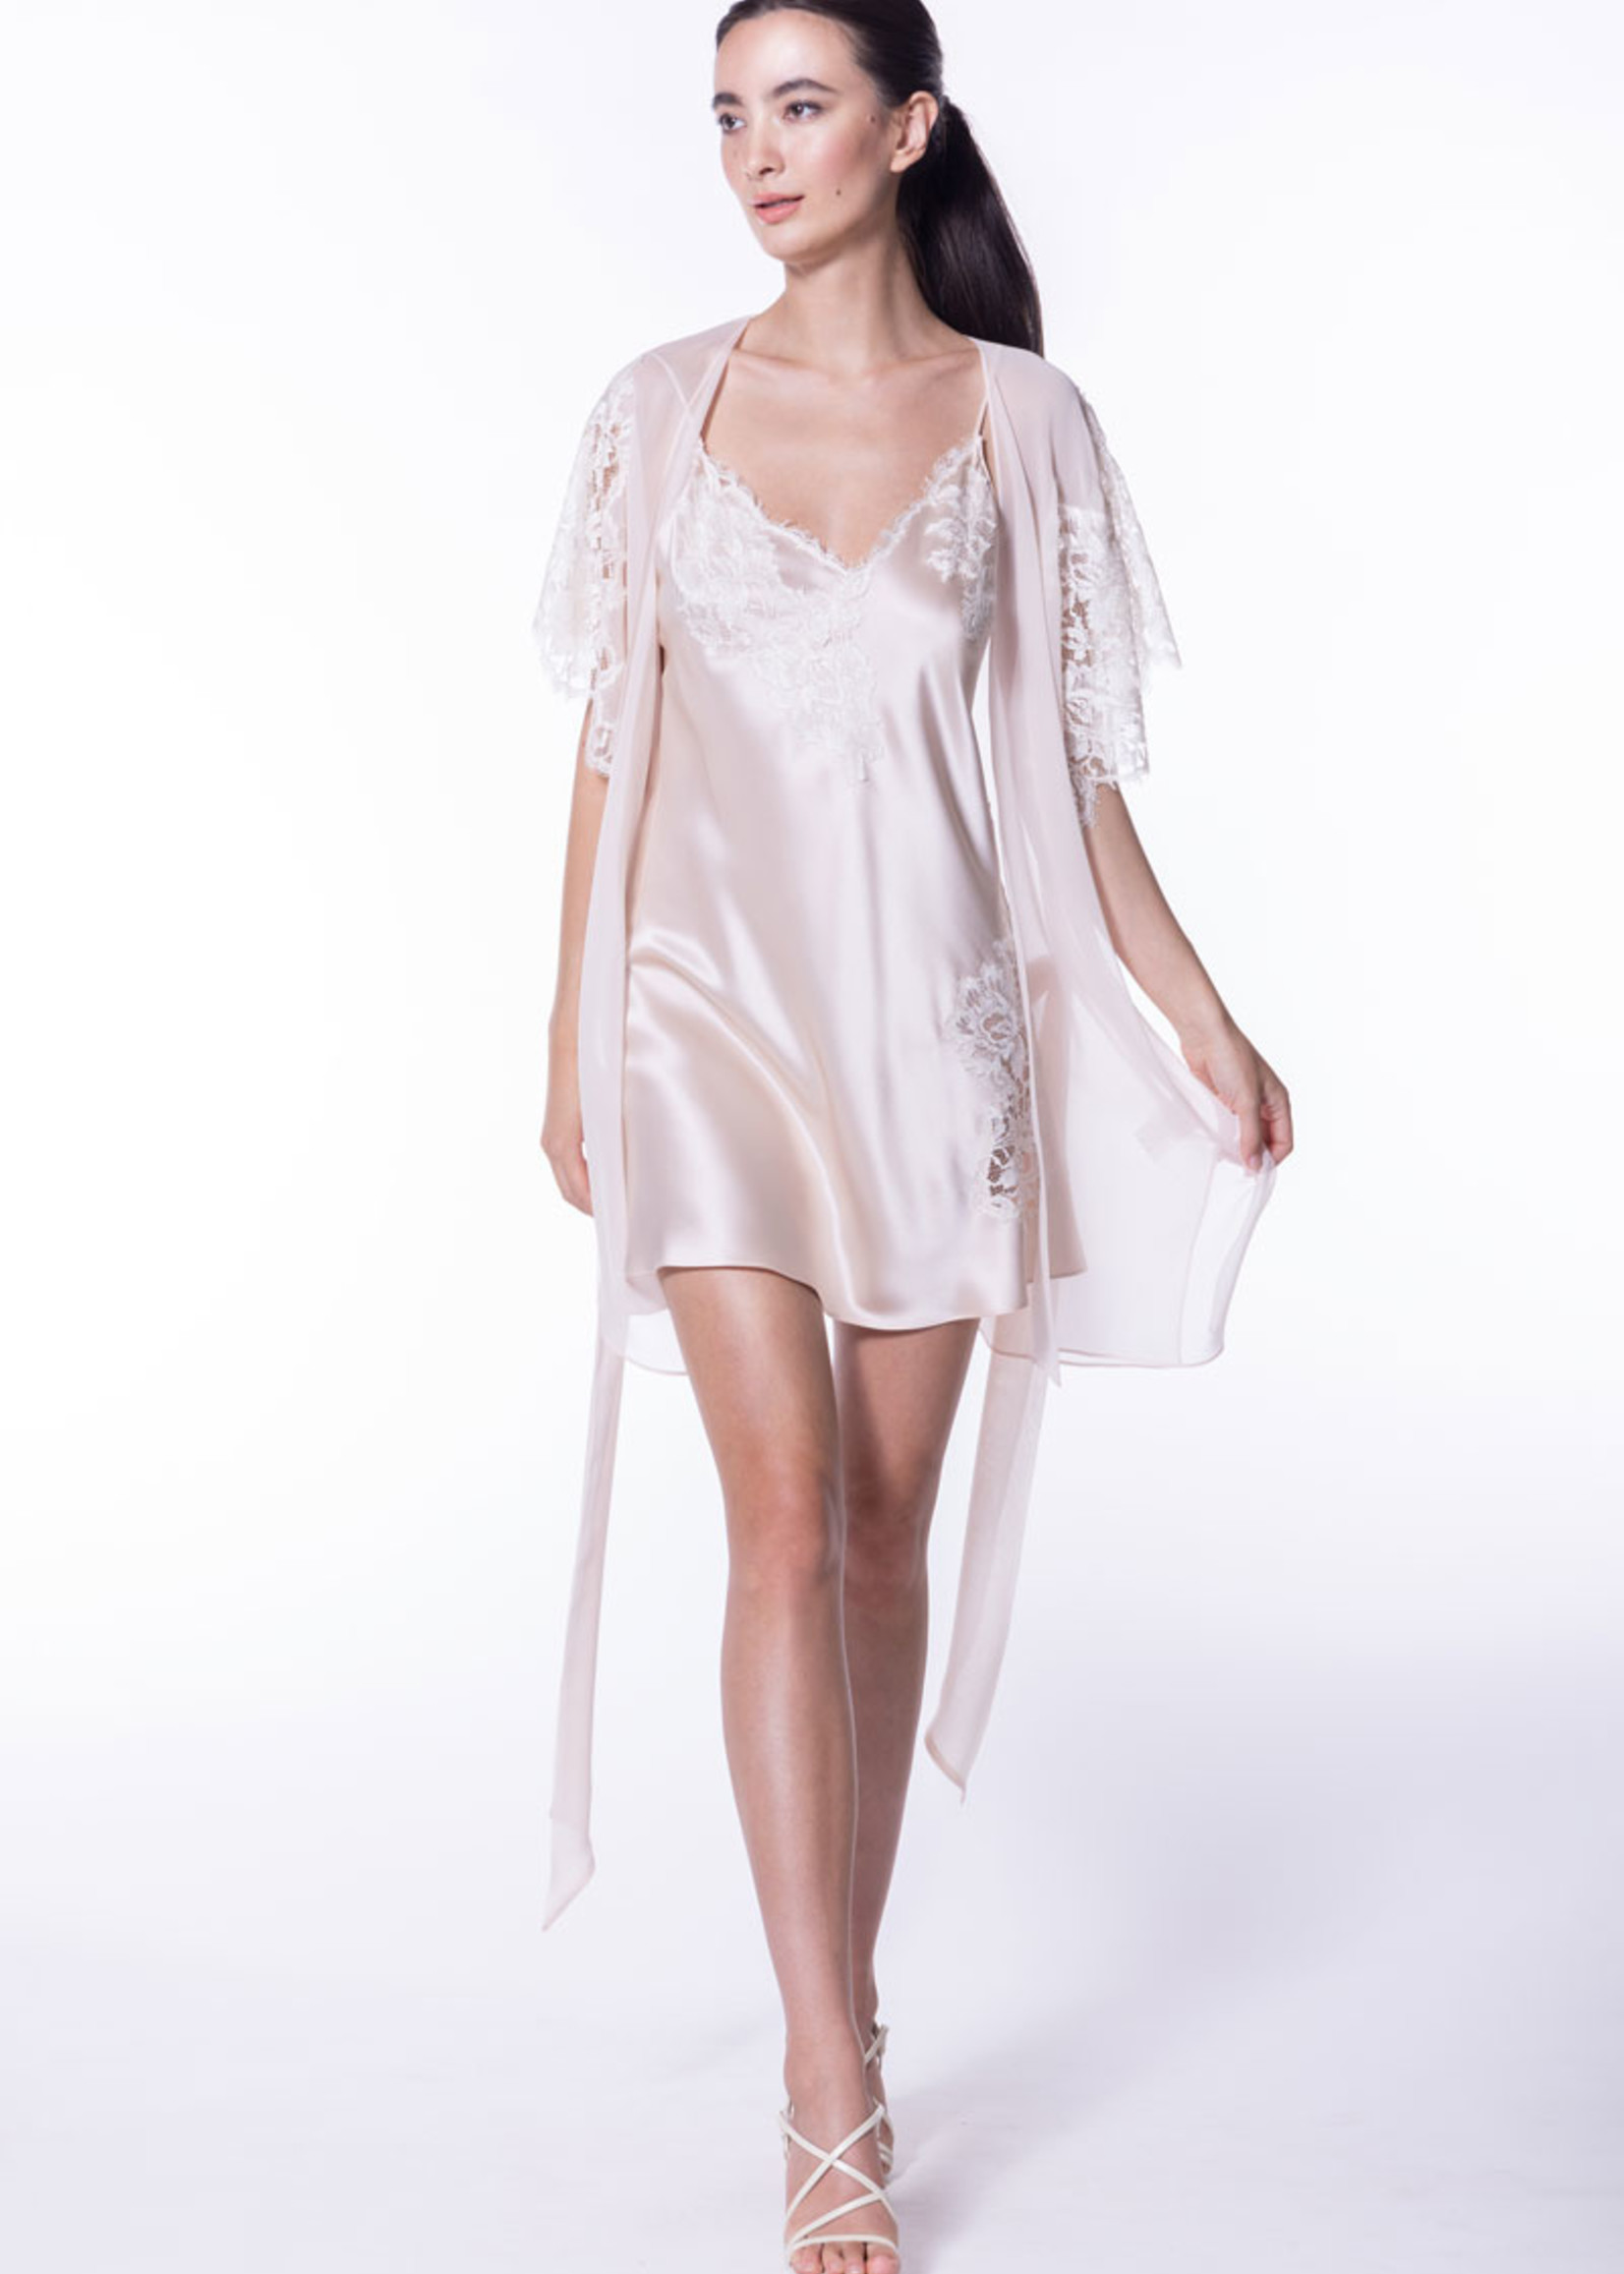 Heirloom Lingerie  Bridal Nightgowns and Negligee Sets